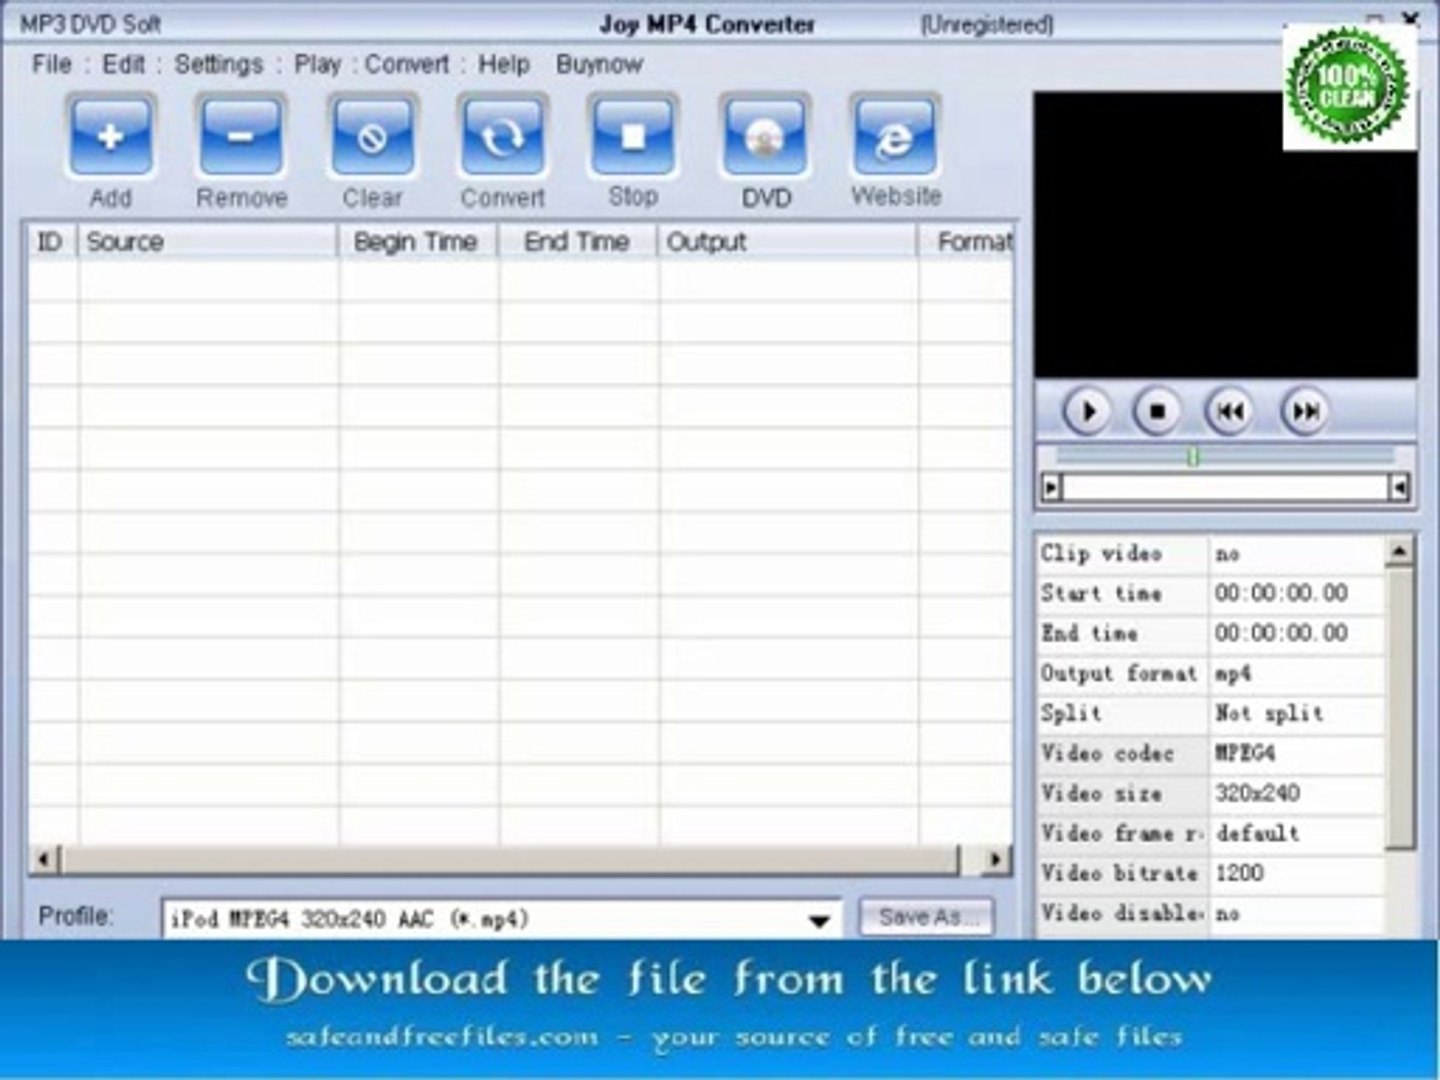 Joy MP4 to MP3 Converter 3.2 Full Version with Crack Download For PC -  video Dailymotion